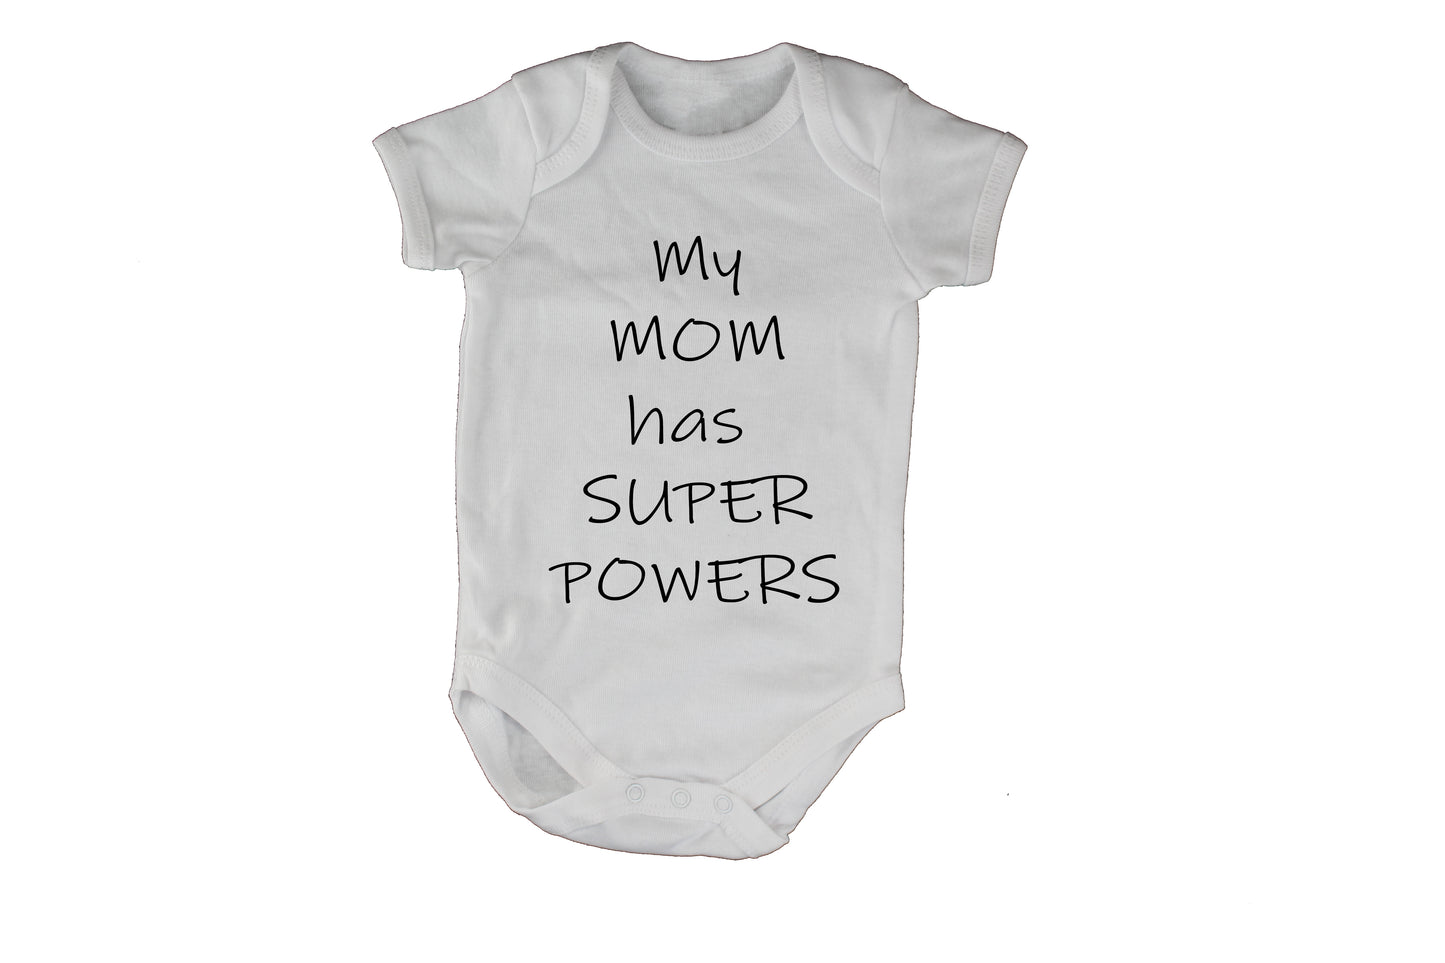 My Mom has Super Powers! - BuyAbility South Africa